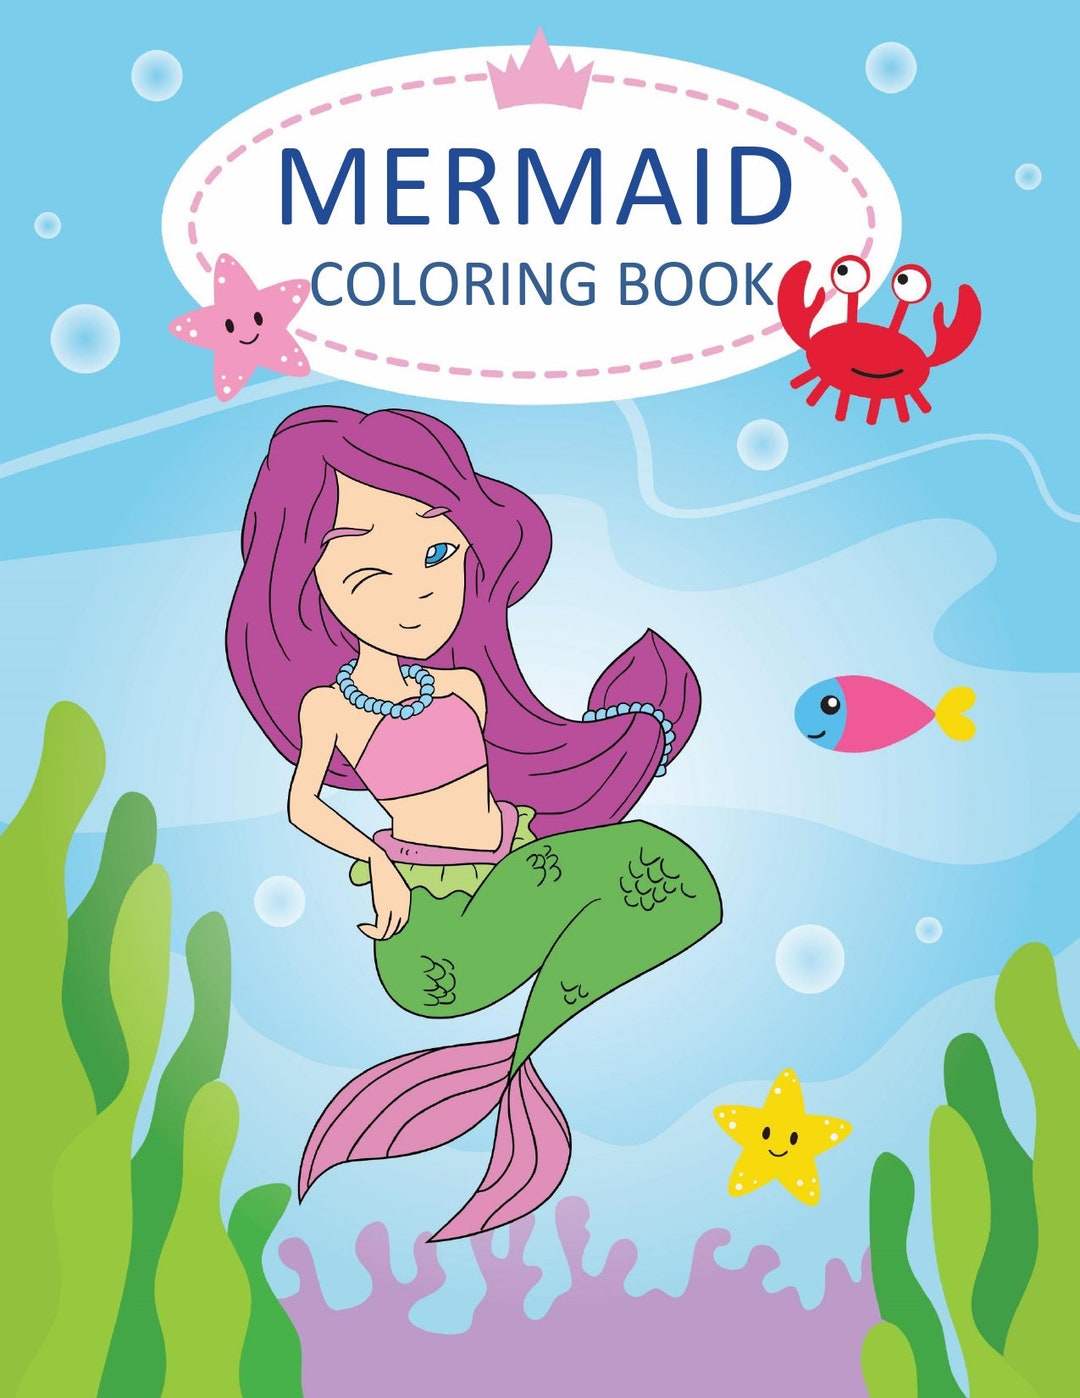 Happy Mermaids: Coloring Book For Kids Ages 4-8